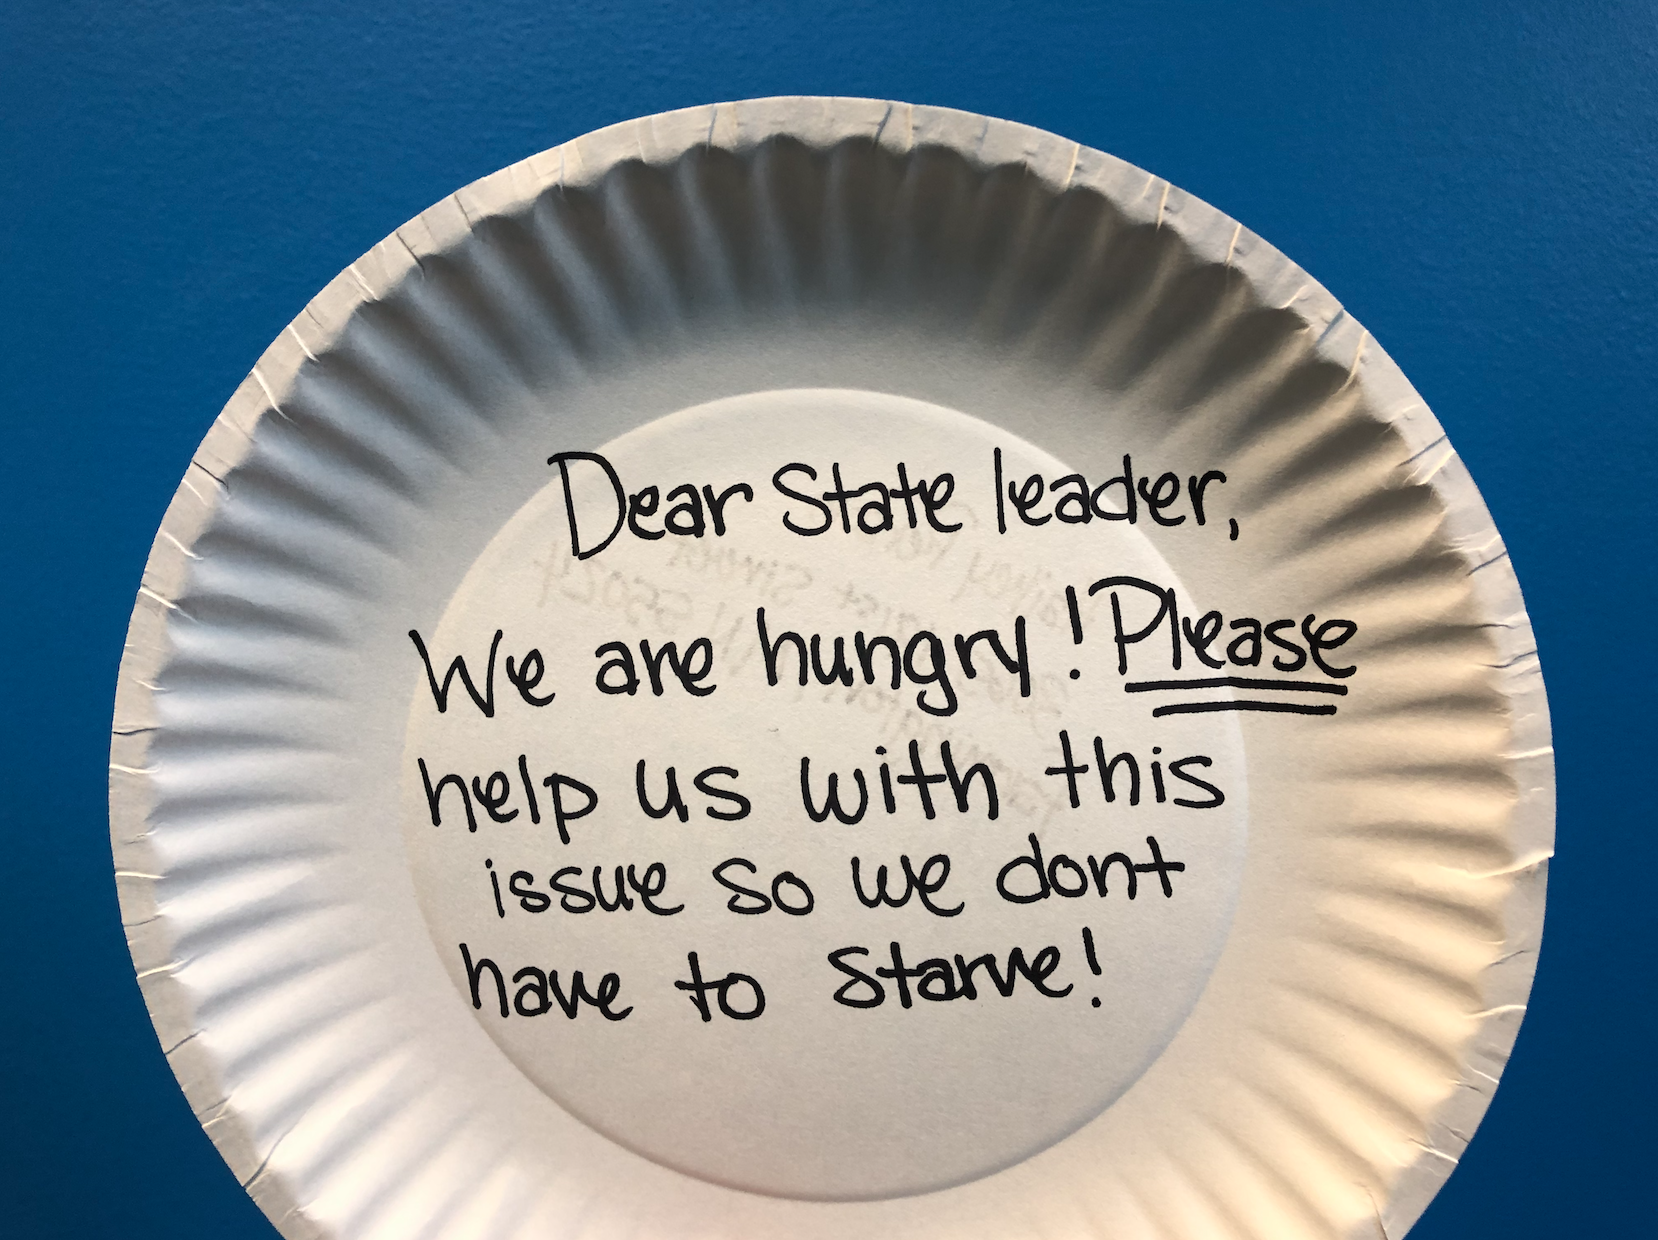 Dear state leader, we are hungry! Please help us with this issue so we don't have to starve!